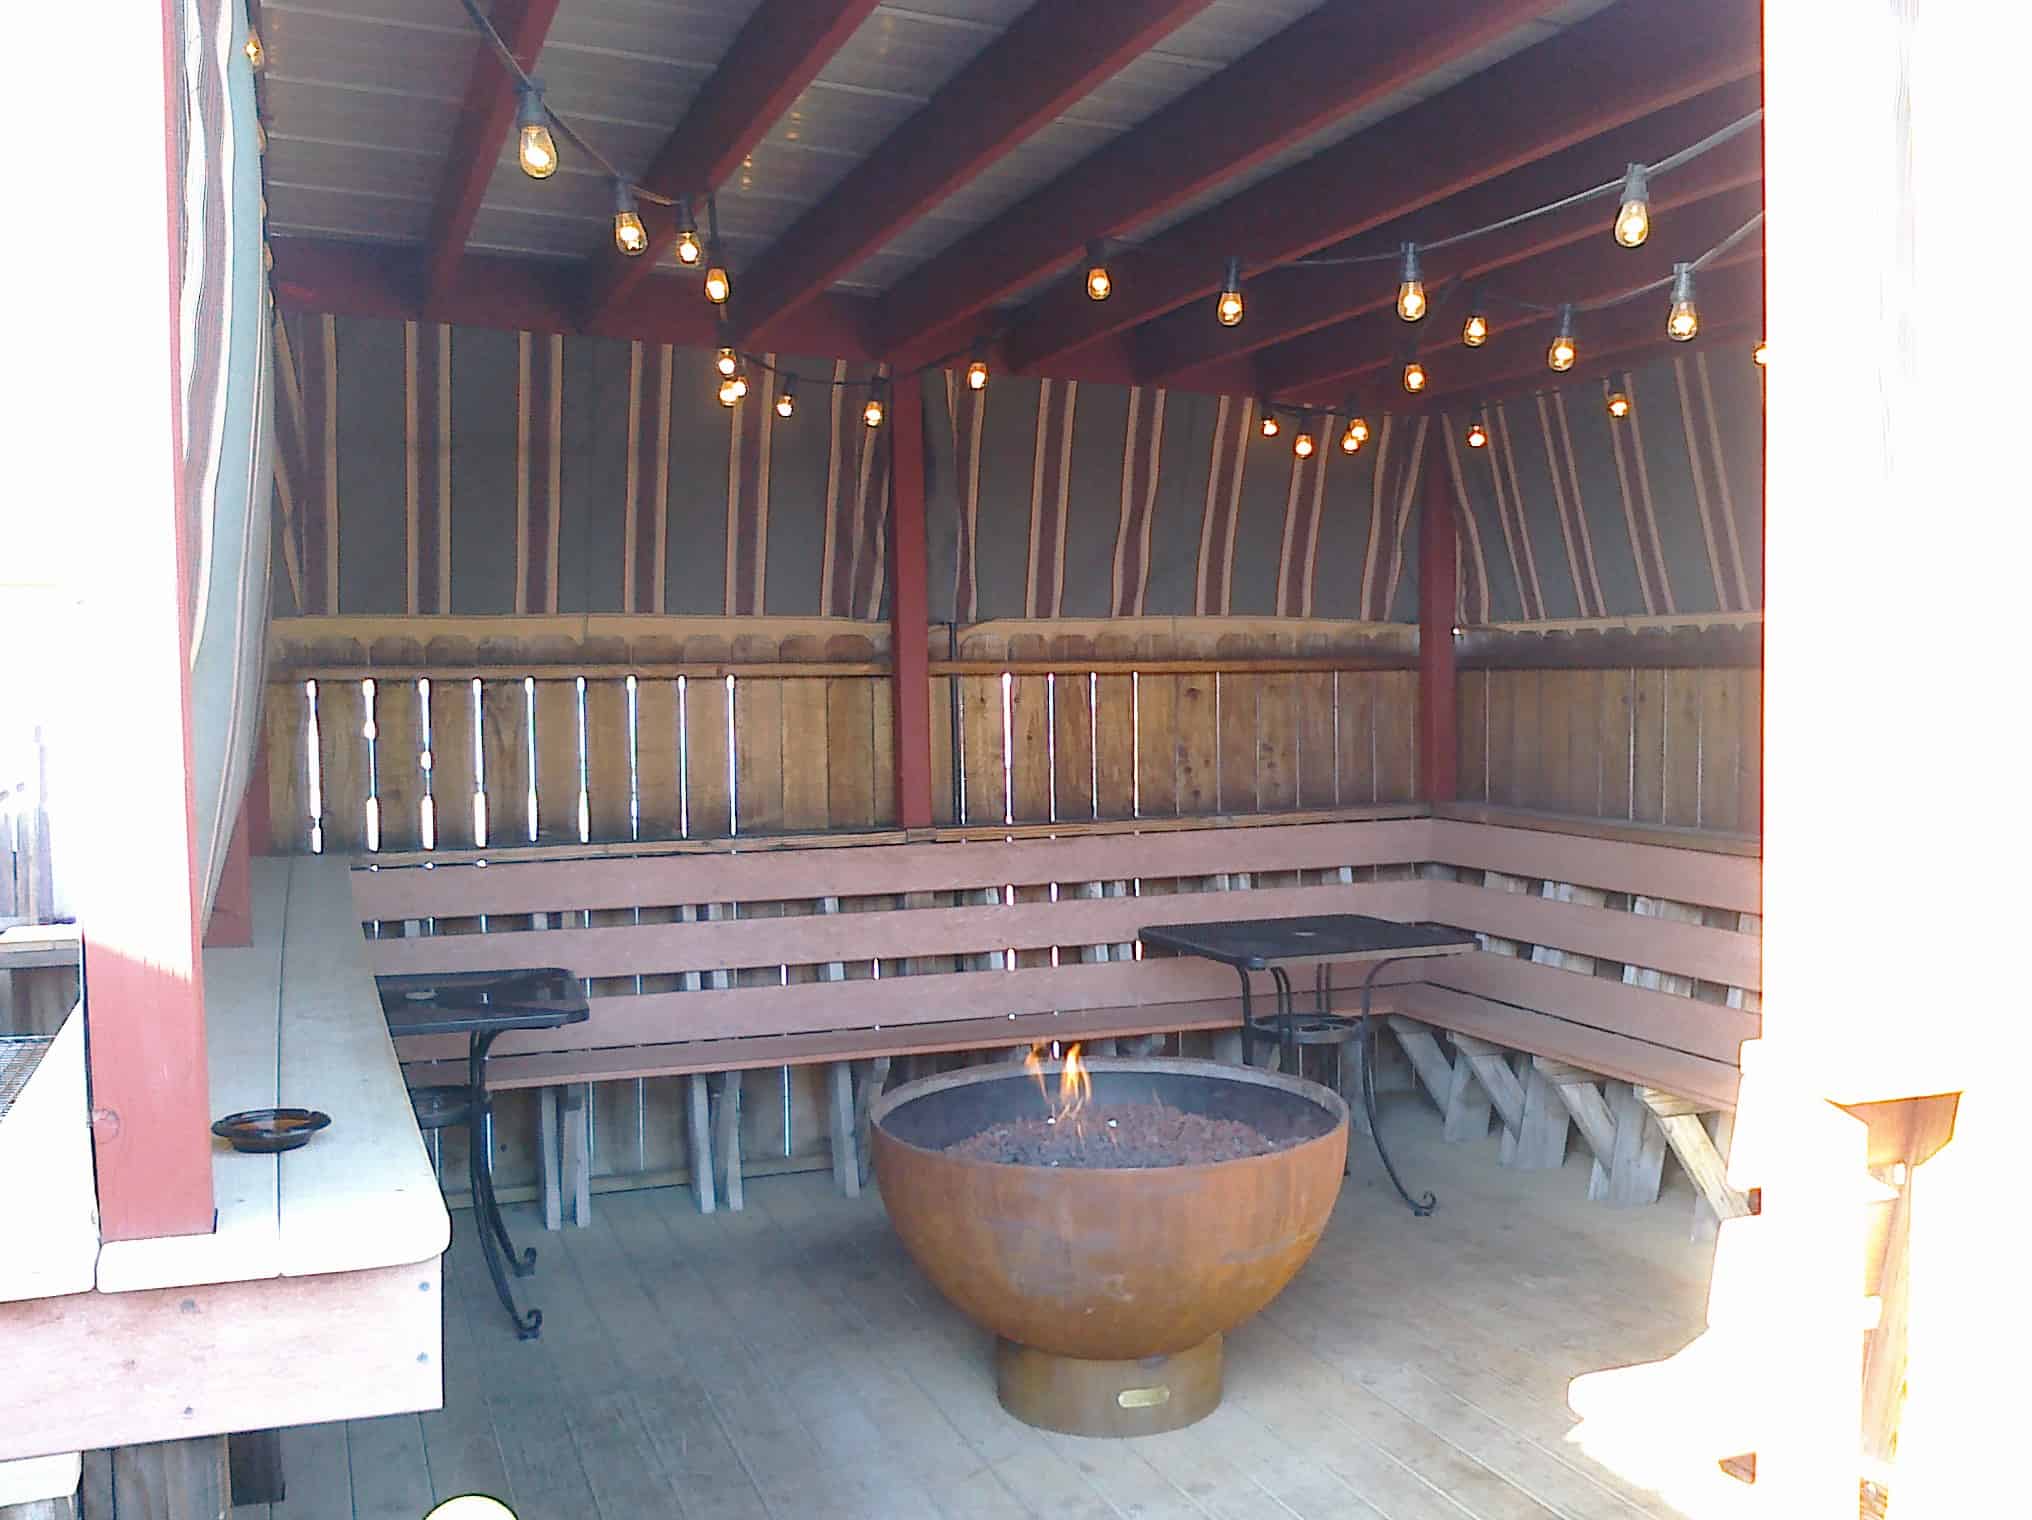 Covered Patio With A Fire Pit Things, Propane Fire Pit Under Covered Deck